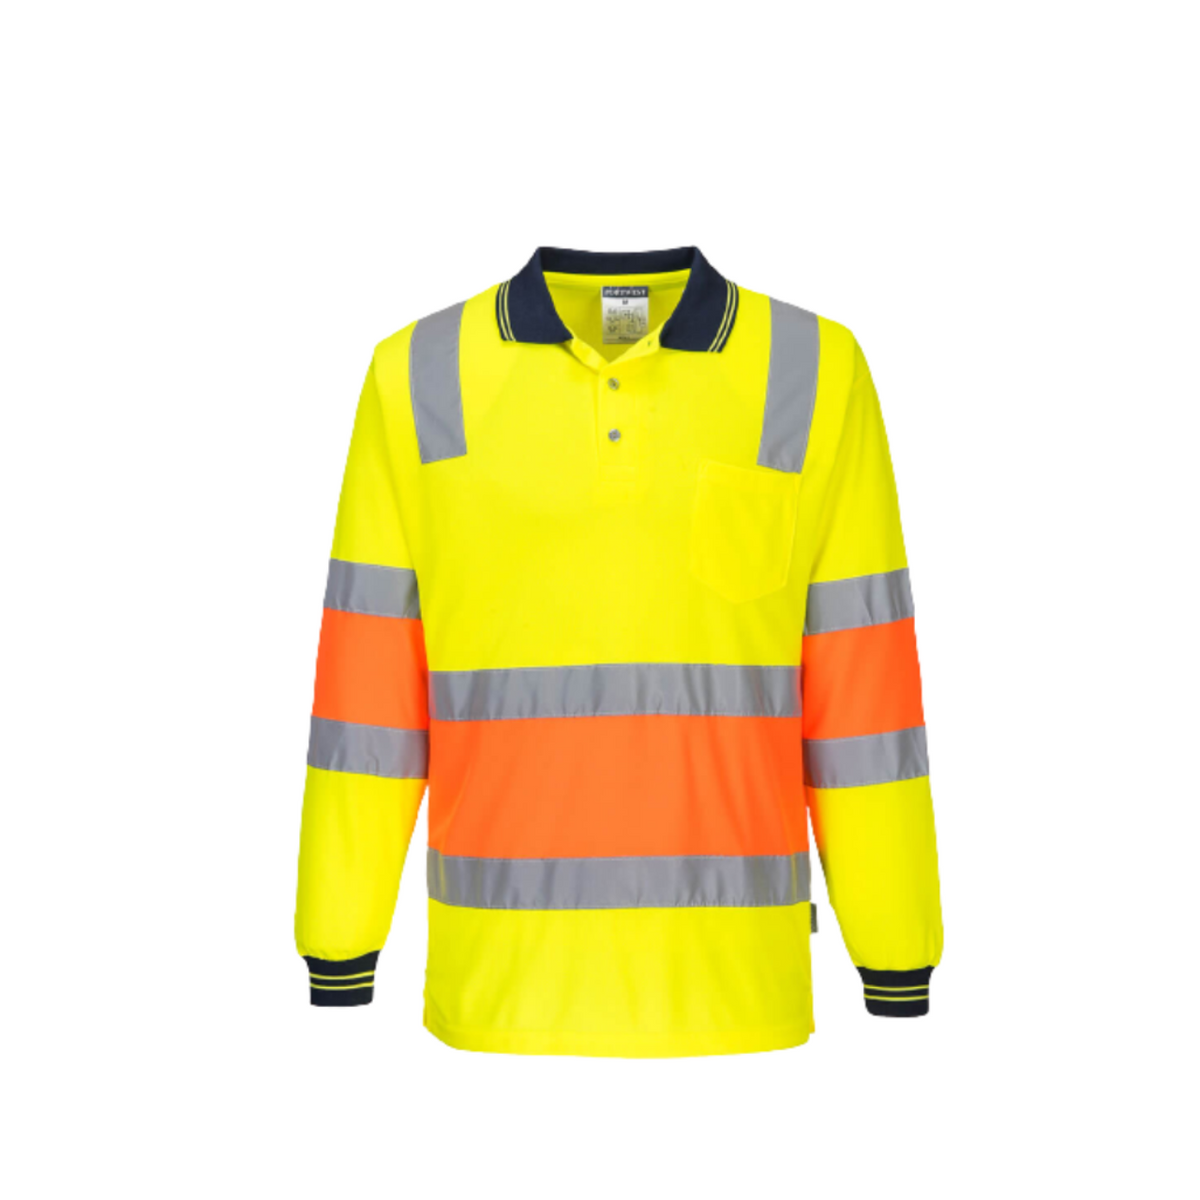 Portwest Two-toned Biomotion Polo Comfortable Shirt Reflective Work Safety MP511-Collins Clothing Co